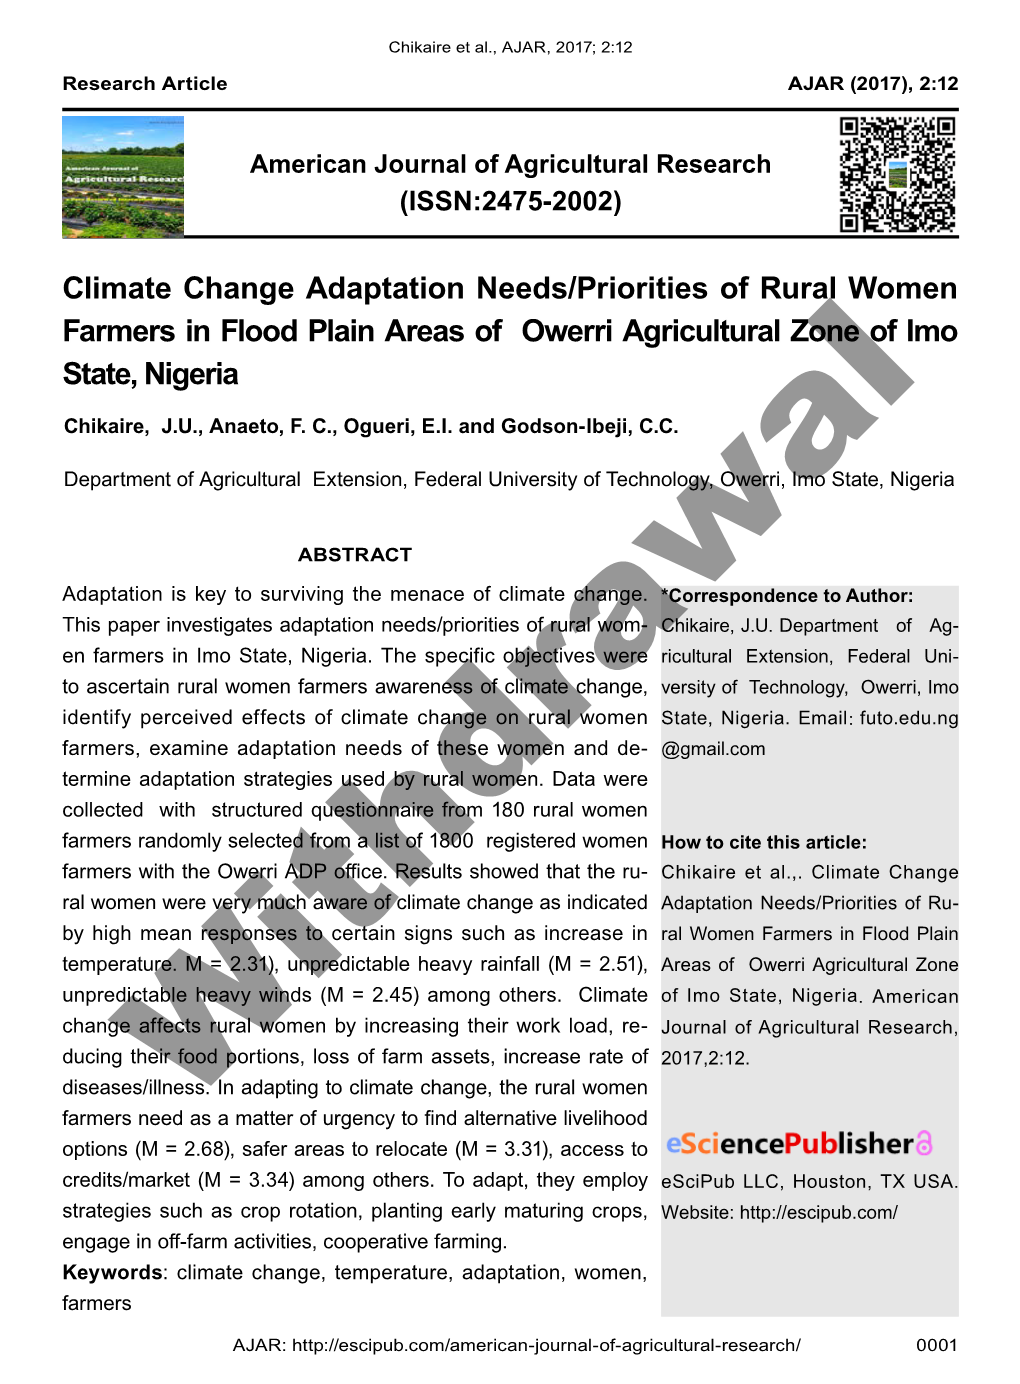 Climate Change Adaptation Needs/Priorities of Rural Women Farmers in Flood Plain Areas of Owerri Agricultural Zone of Imo State, Nigeria